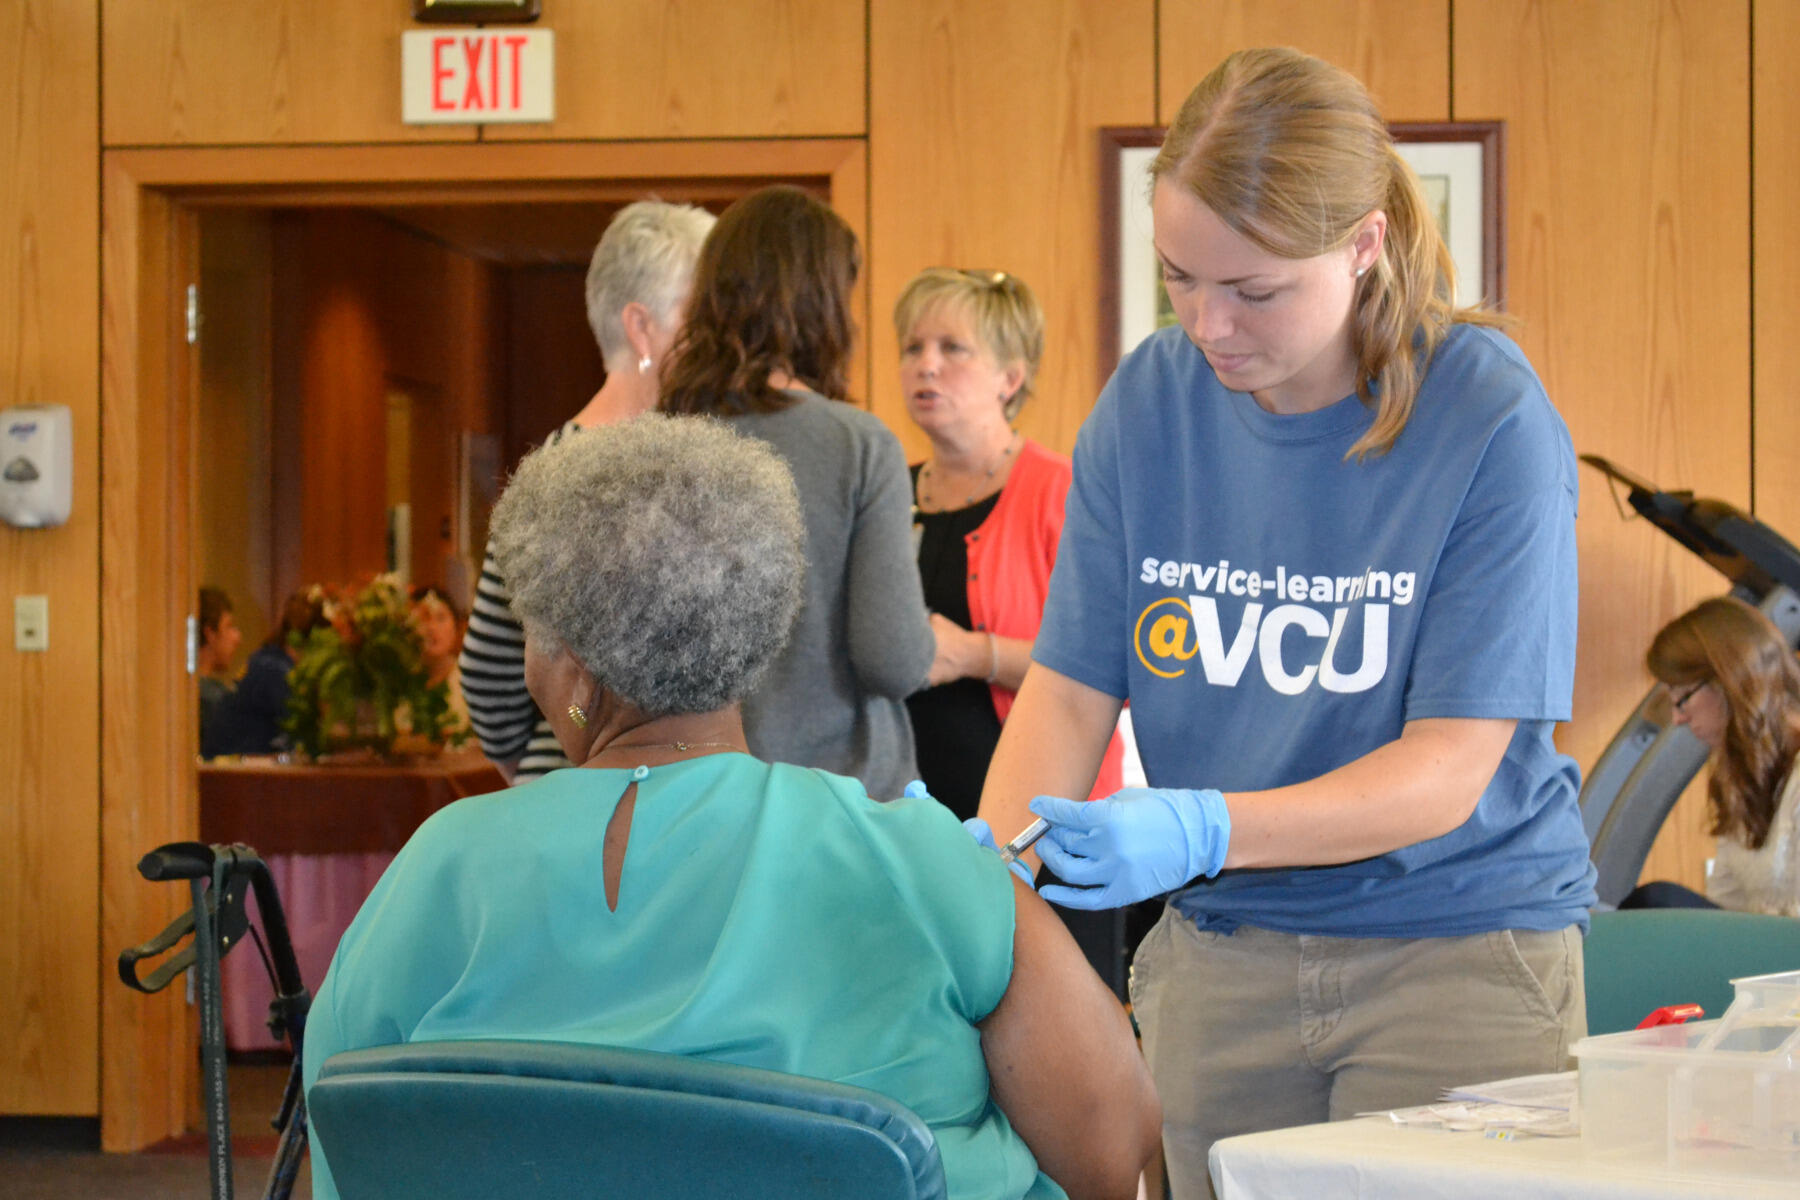 A student in the Richmond Health and Wellness Program provides on-site care during a health fair at Dominion Place.
<br>Photo courtesy of Richmond Health and Wellness Program.